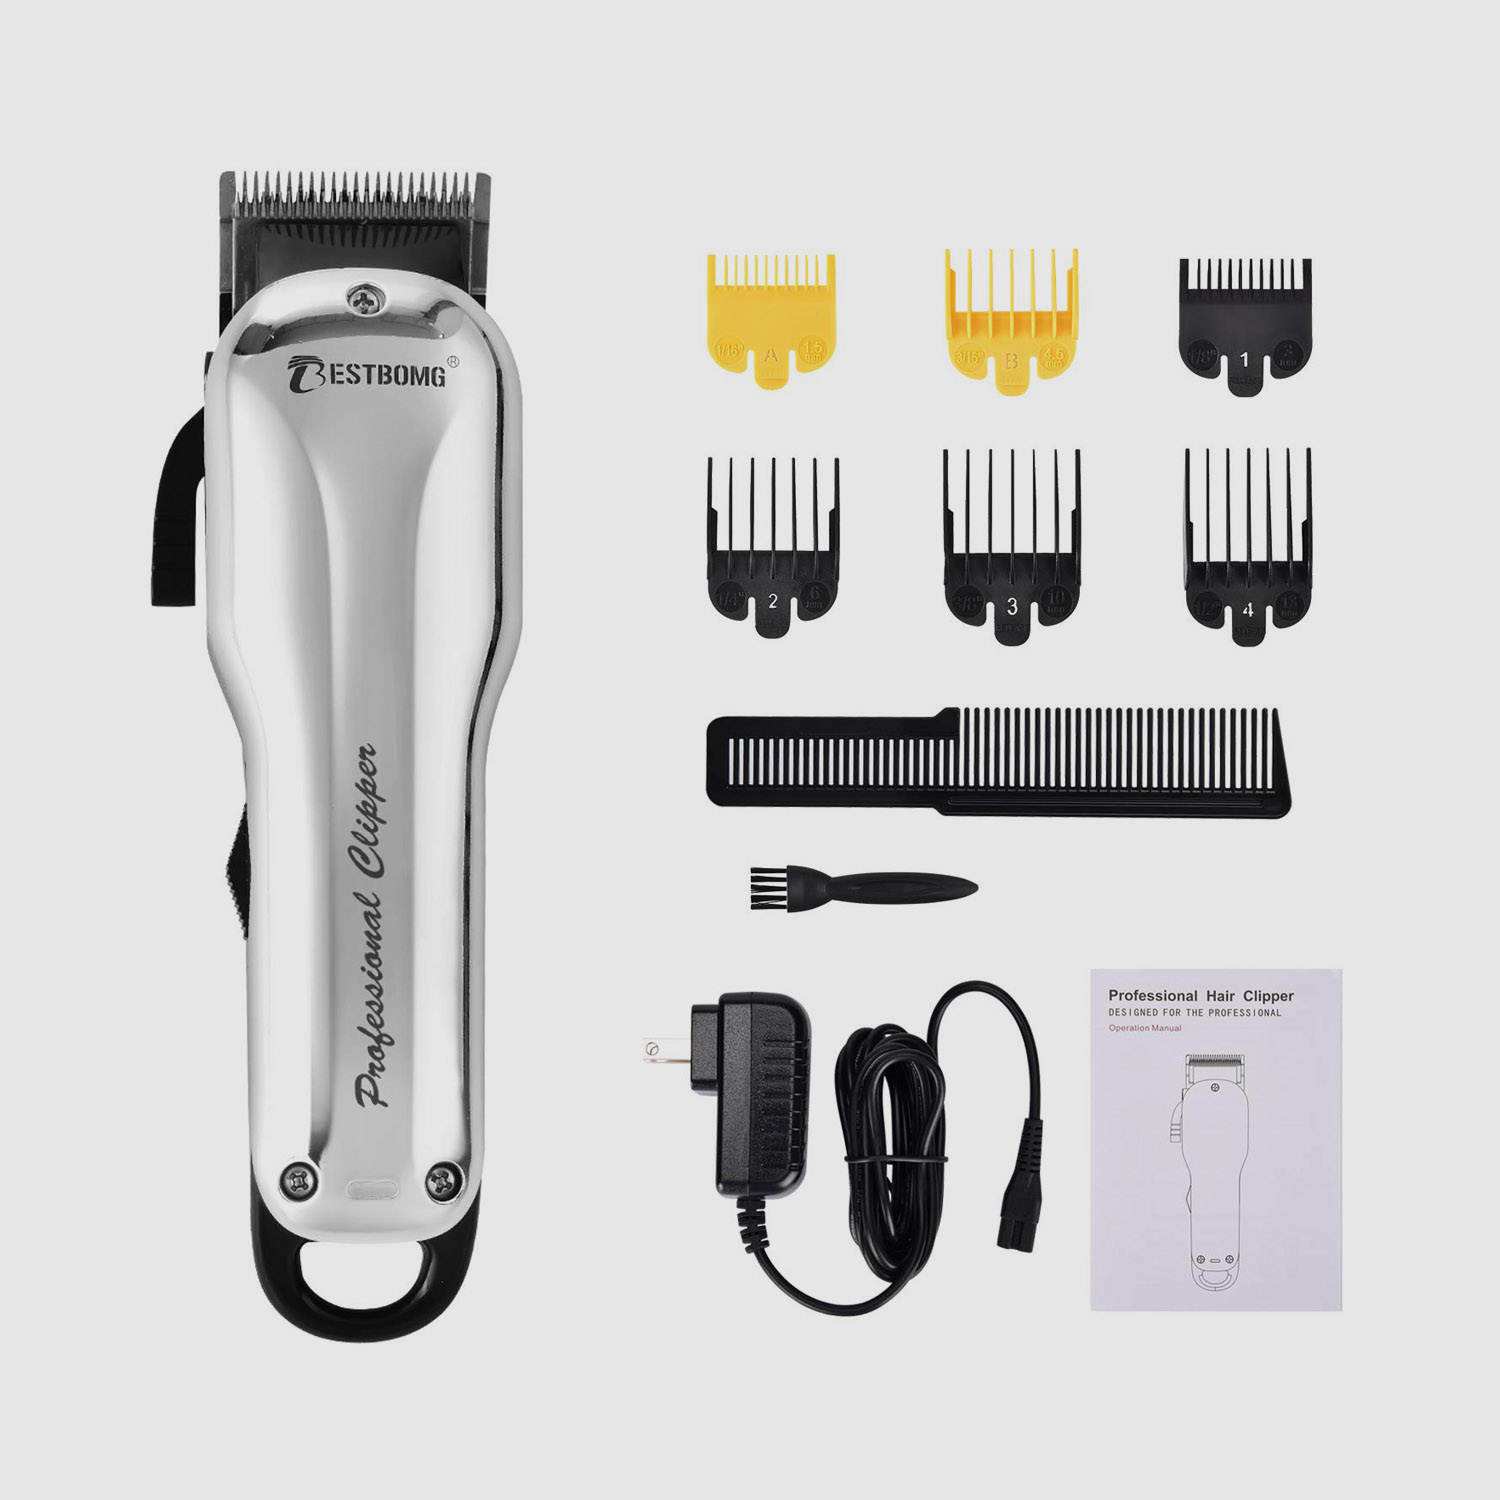 Professional Rechargeable Hair Cutting Kit - 0 